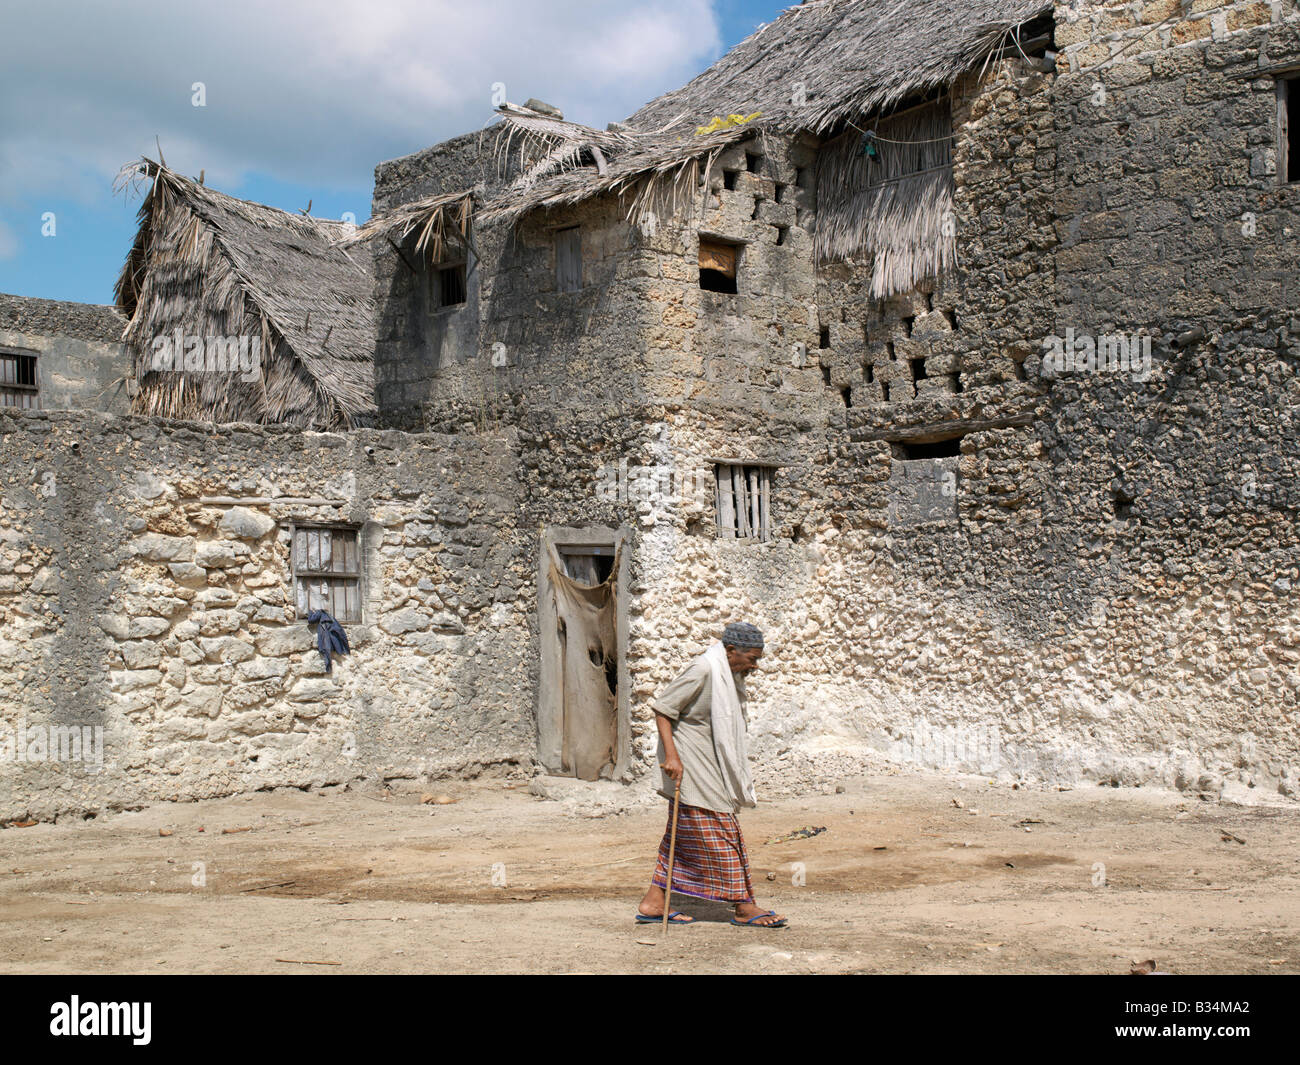 Kenya, Pate Island, Pate Village. An elderly man strides past a large double-storied building in Pate Village. All the buildings Stock Photo